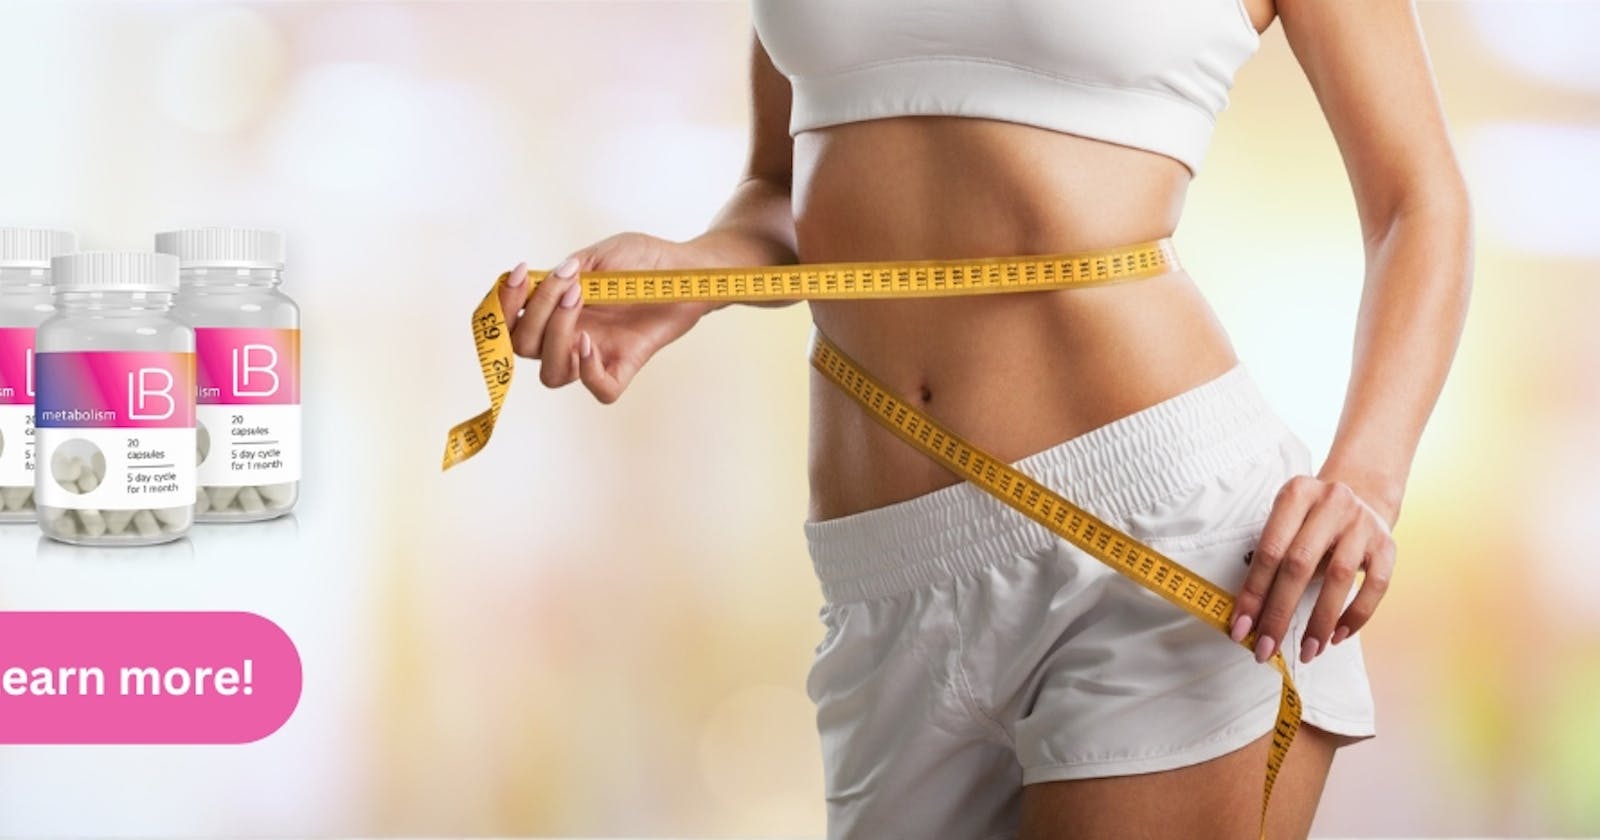 Liba Weight loss Capsules UK - Reviews, Benefits, Side Effects, Price!